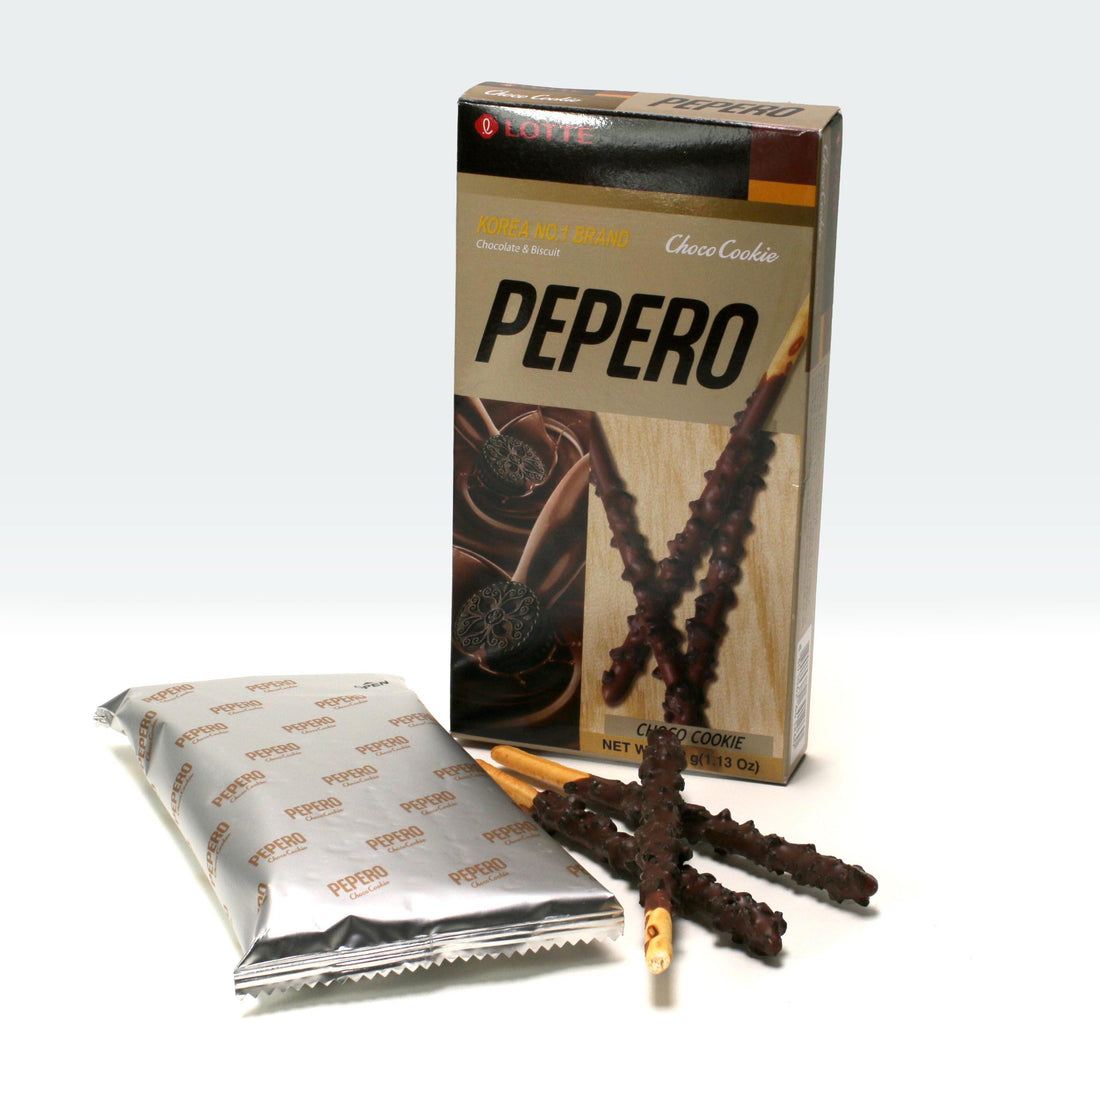 Lotte Pepero Choco Cookie 1.13oz(32g) - Anytime Basket